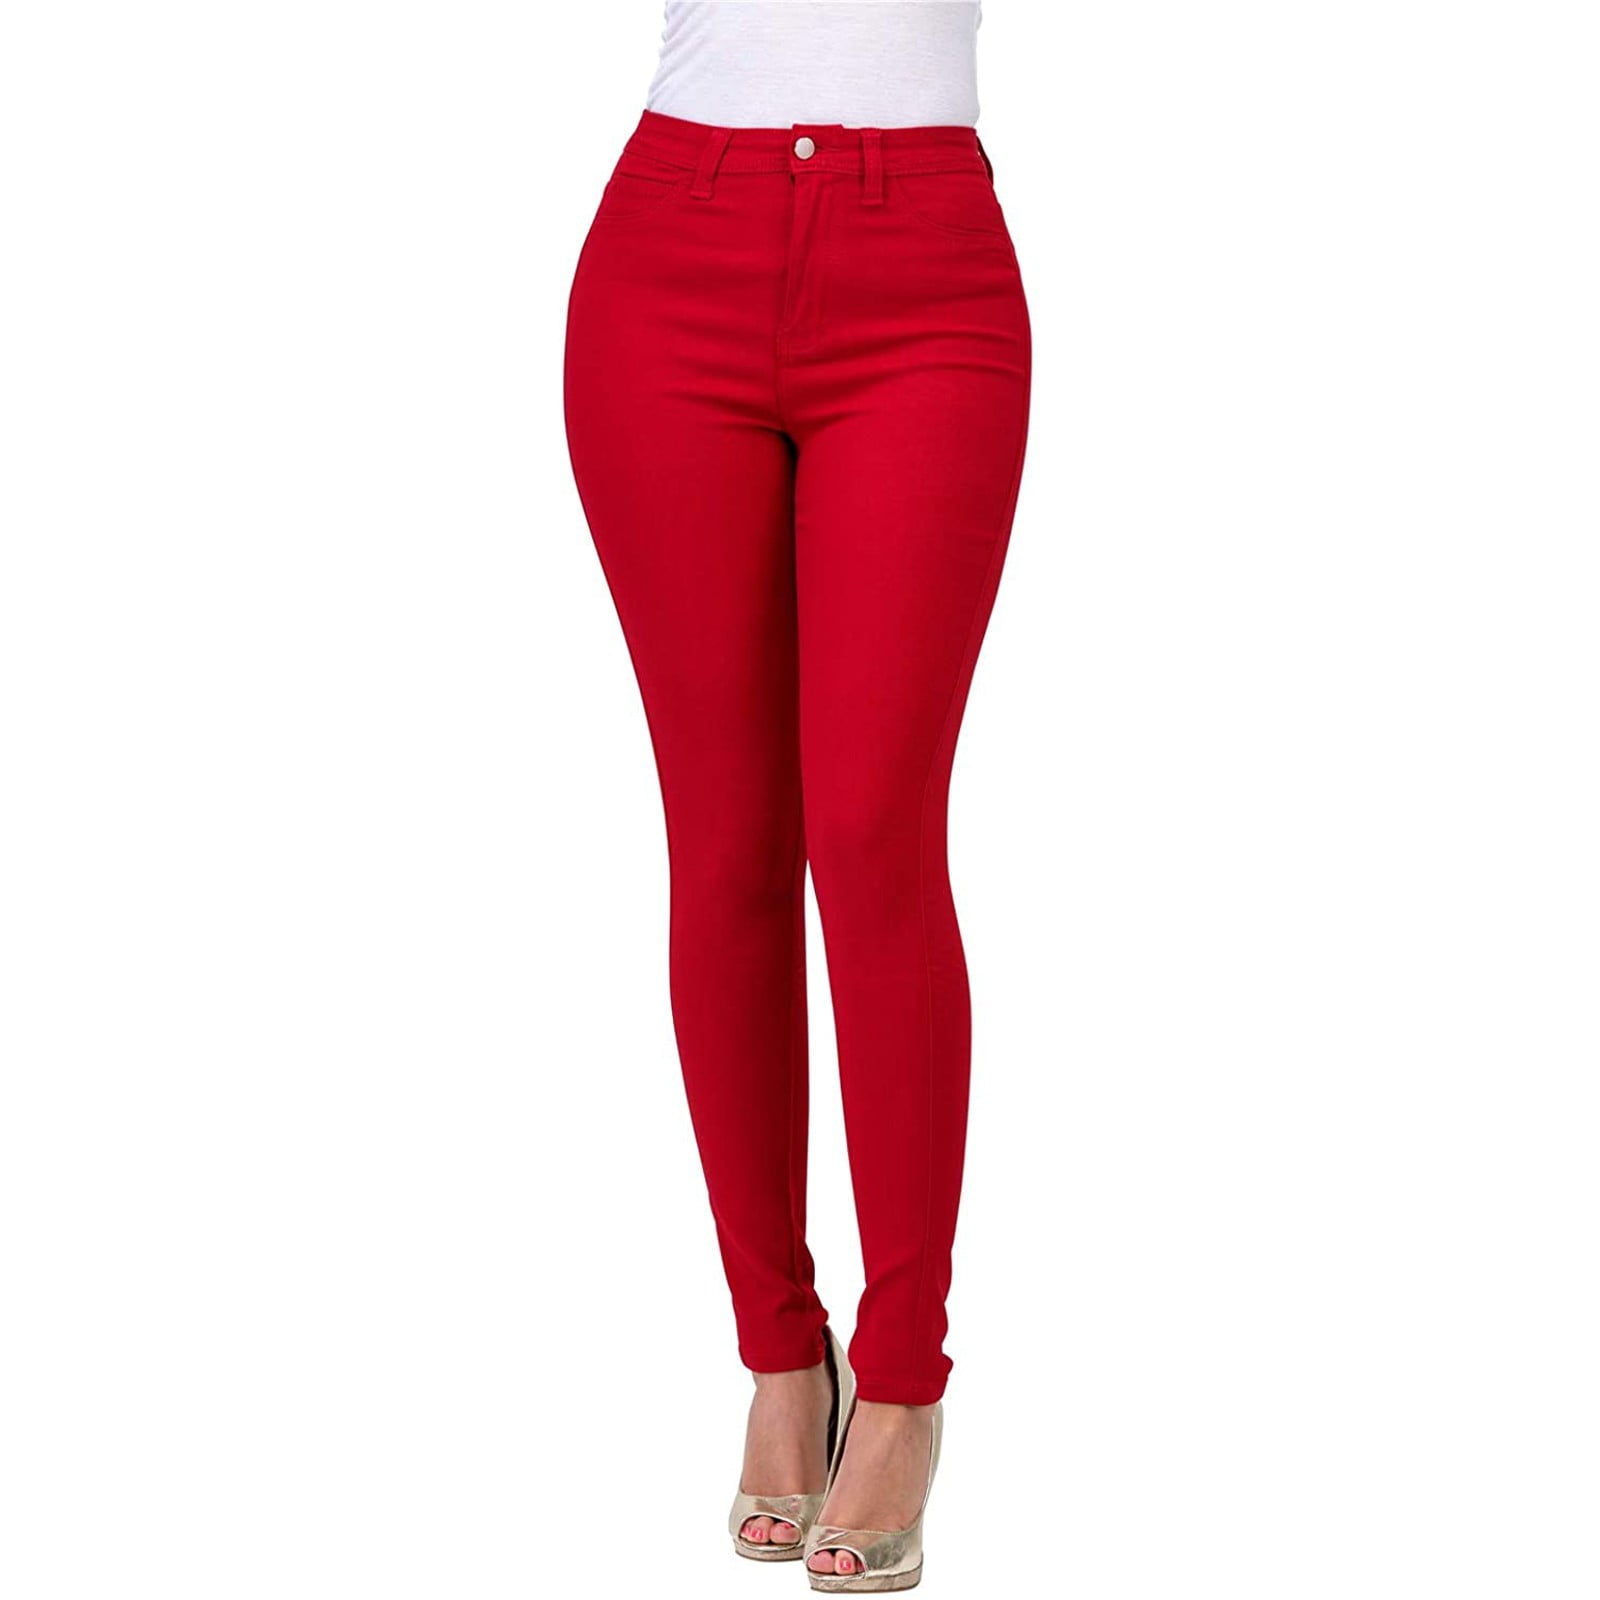 WANYNG pants for women Waisted Rise High Pant Stretc For Skinny Jeans Pants  womens fall fashion 2022 Red S 